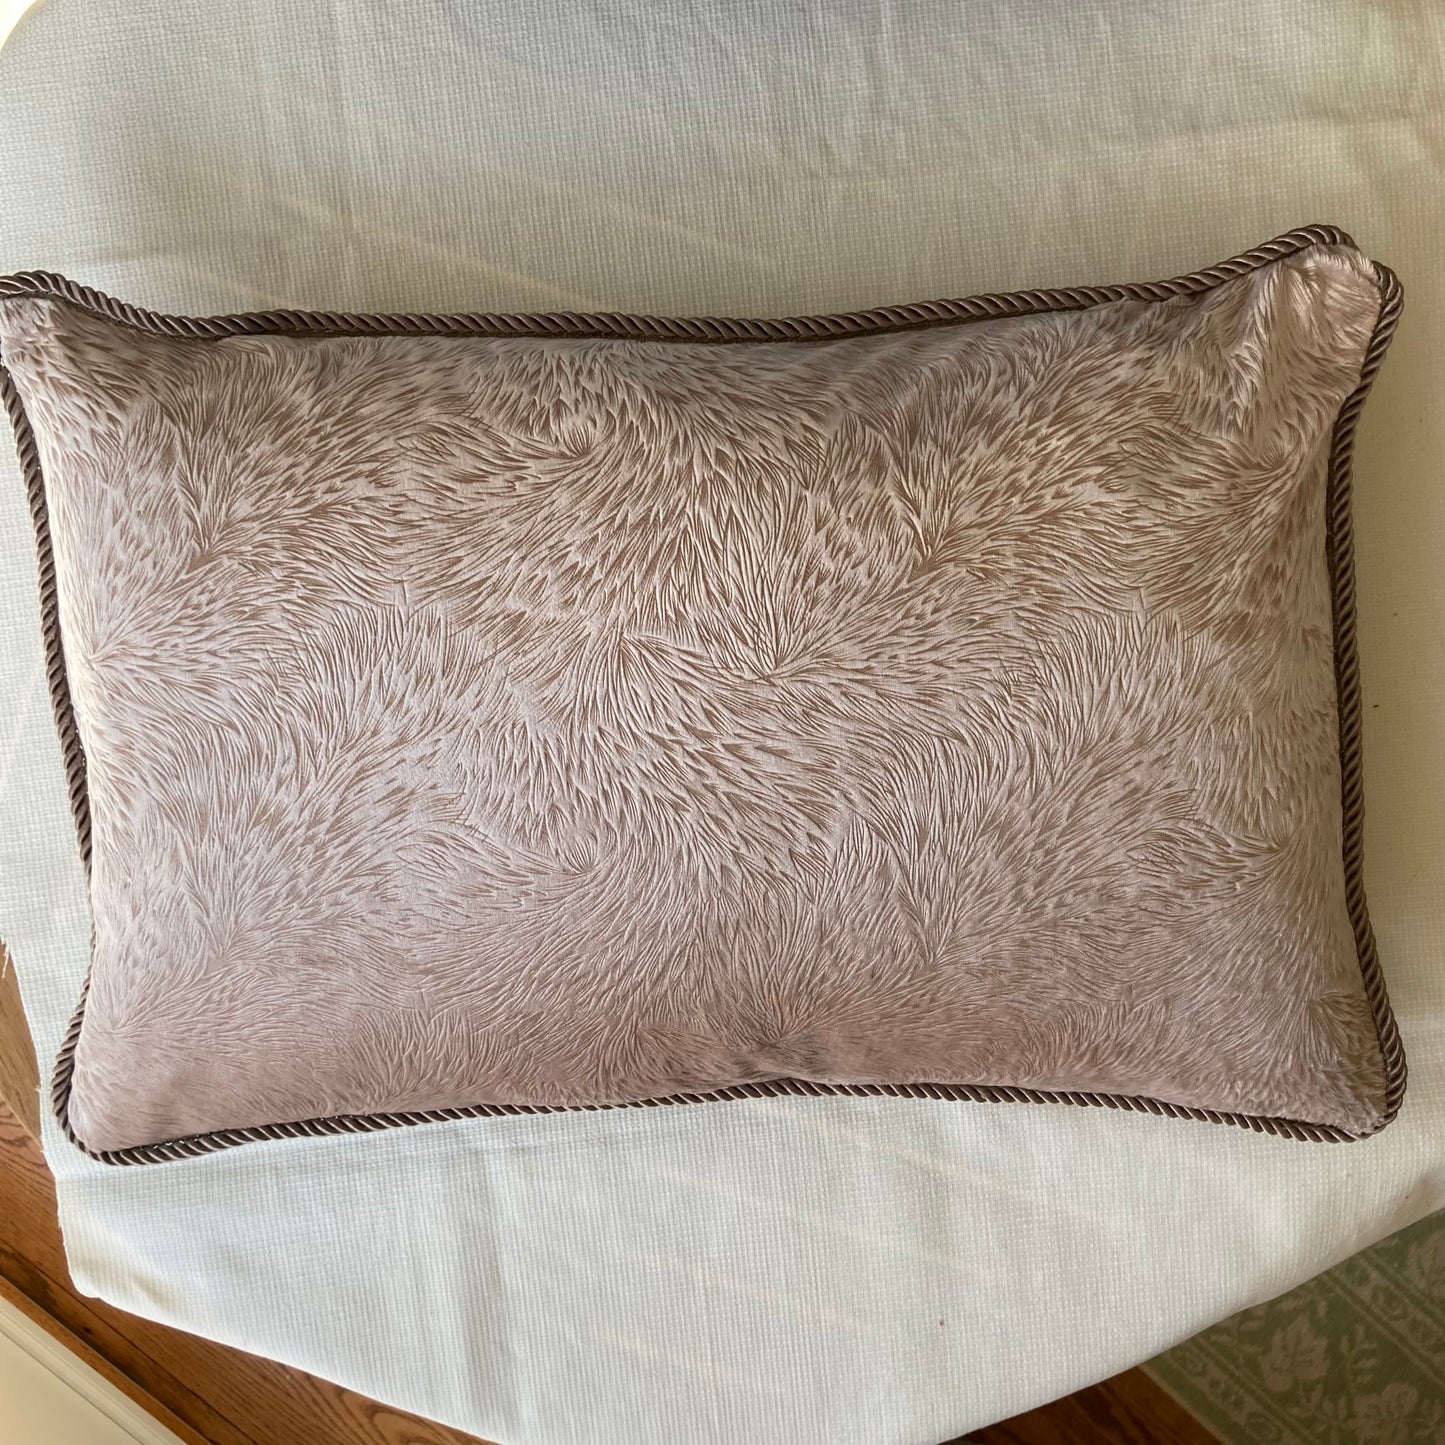 Dusty Mauve and Cocoa Velvet Boho 16 X 24 Rectangle Decorative Lumbar Designer Pillow with Down Feather Insert